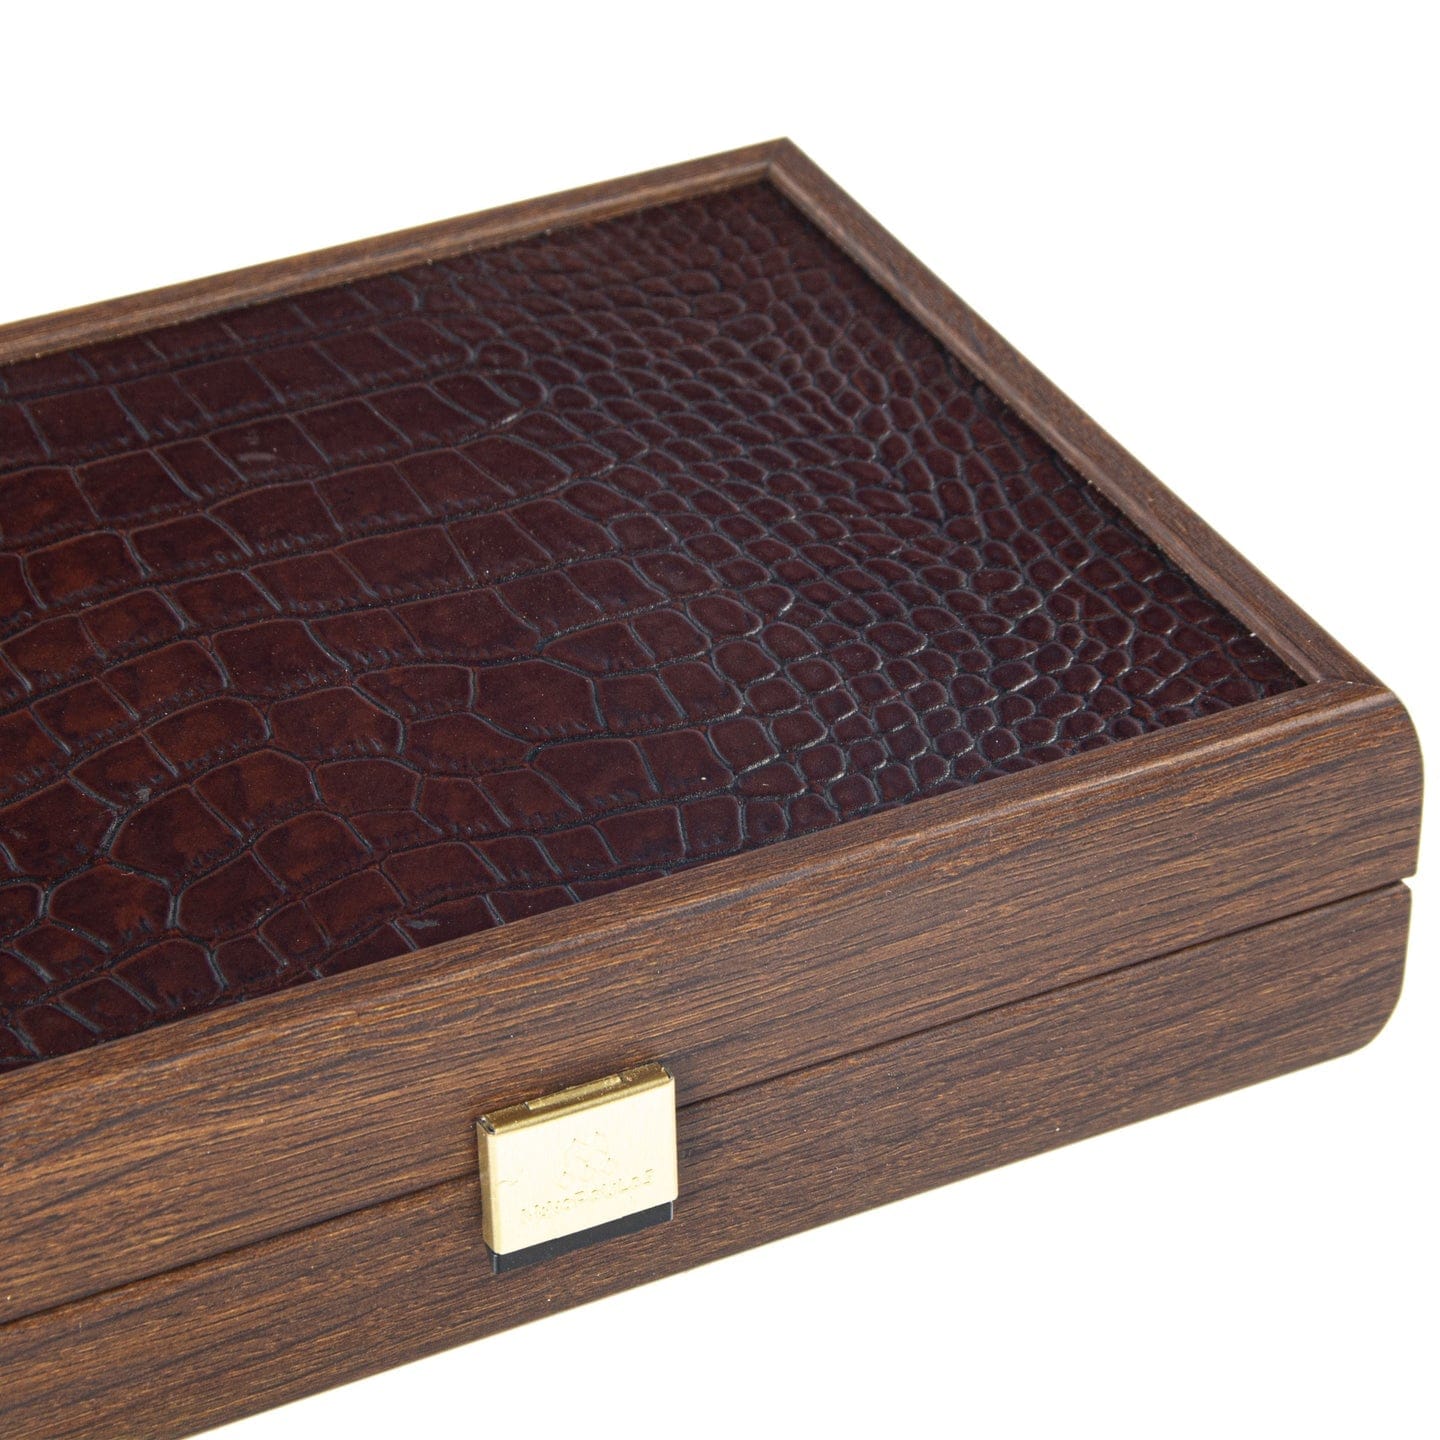 PLASTIC COATED PLAYING CARDS in Brown Leather Croc tote wooden case - LAZADO